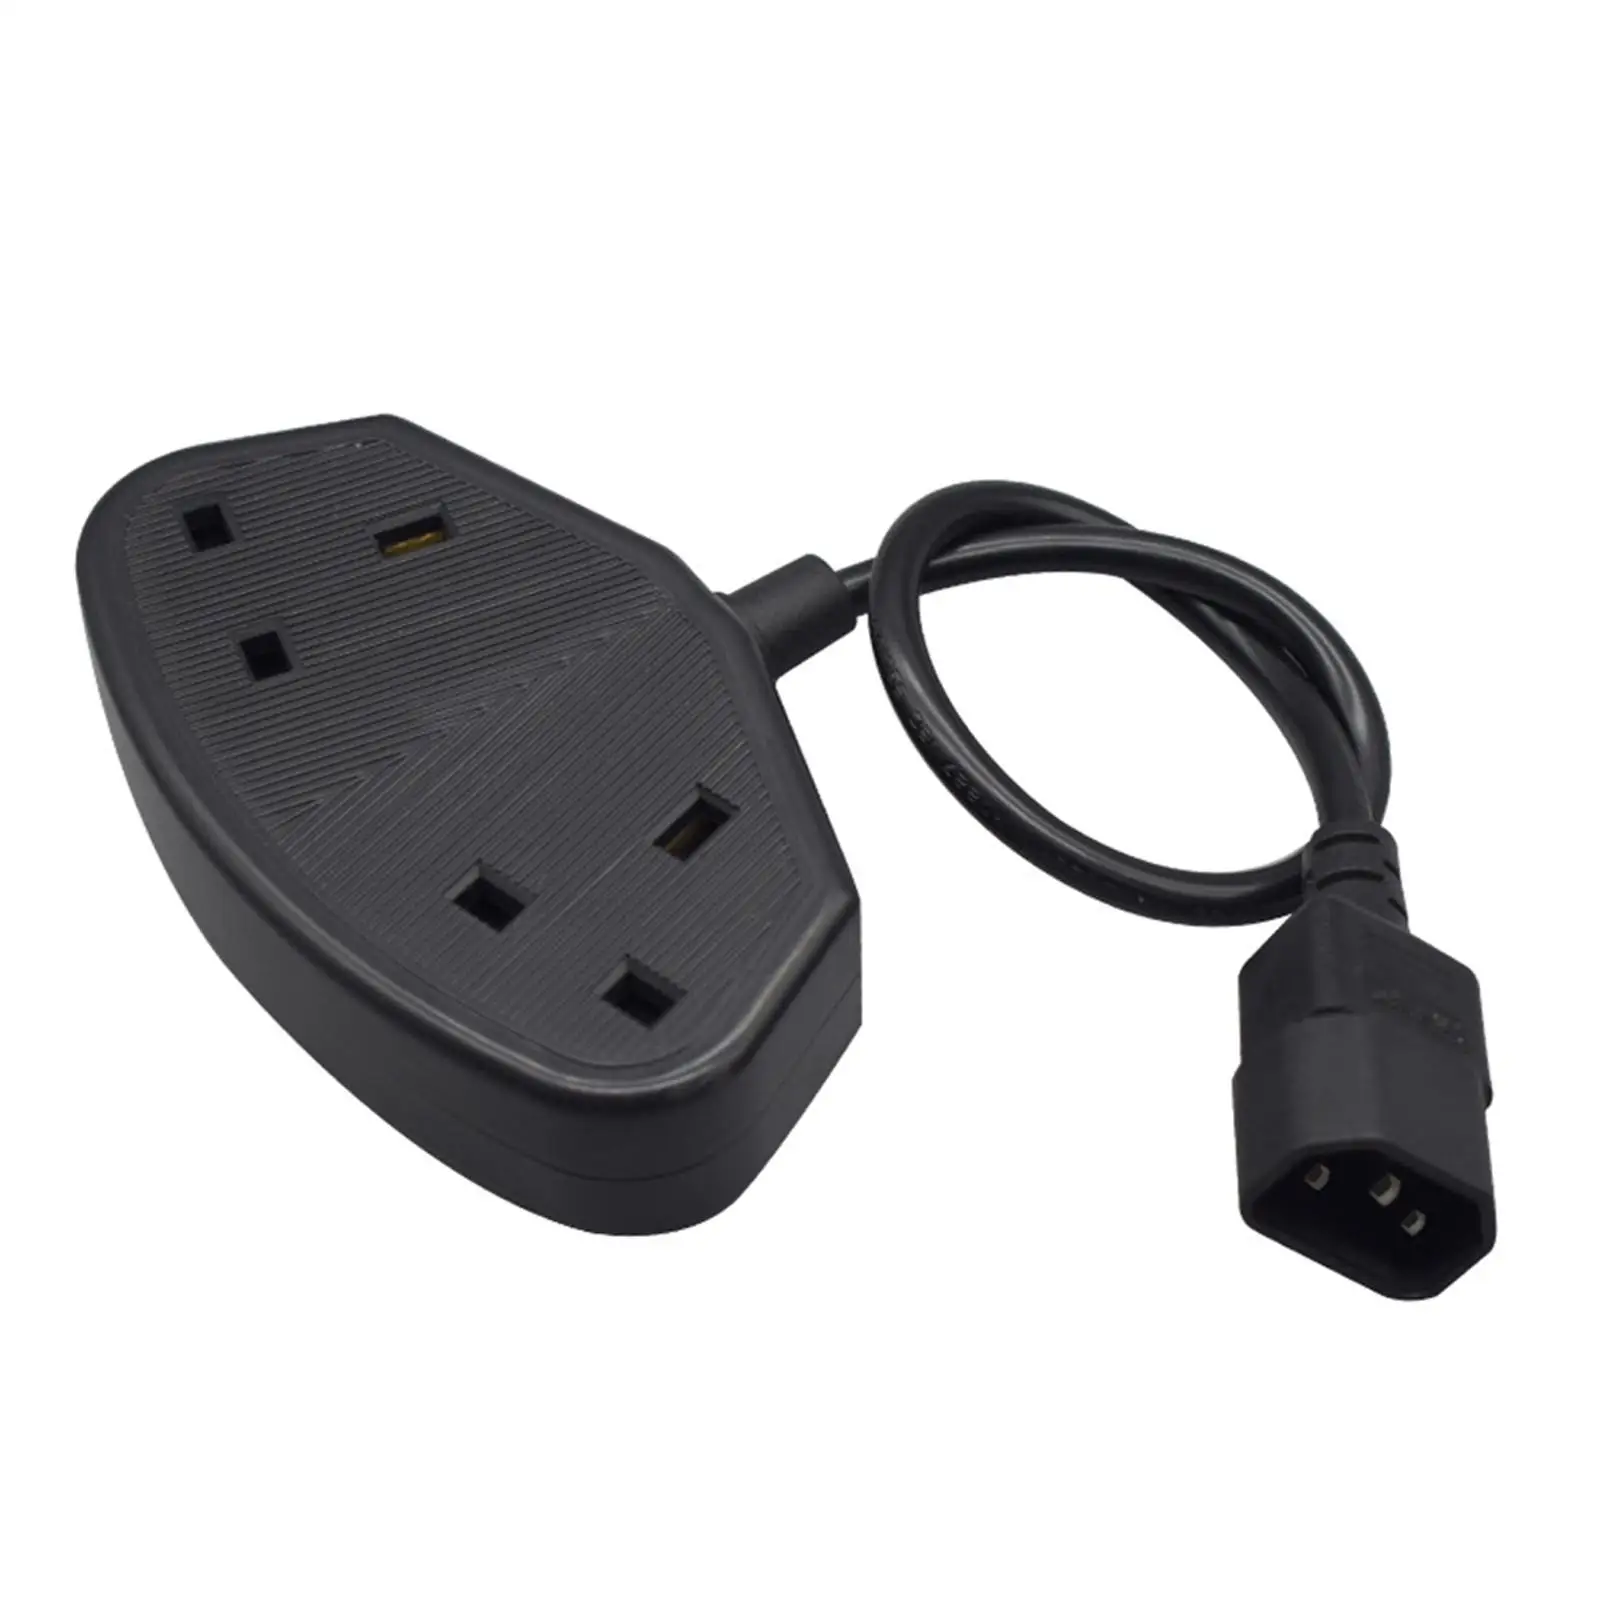 IEC320 C14 to Dual UK Power Cable Power Adapter Splitter Durable Repl ement Computer 2500W 125-250V 10A 30cm Cord   Power Cord